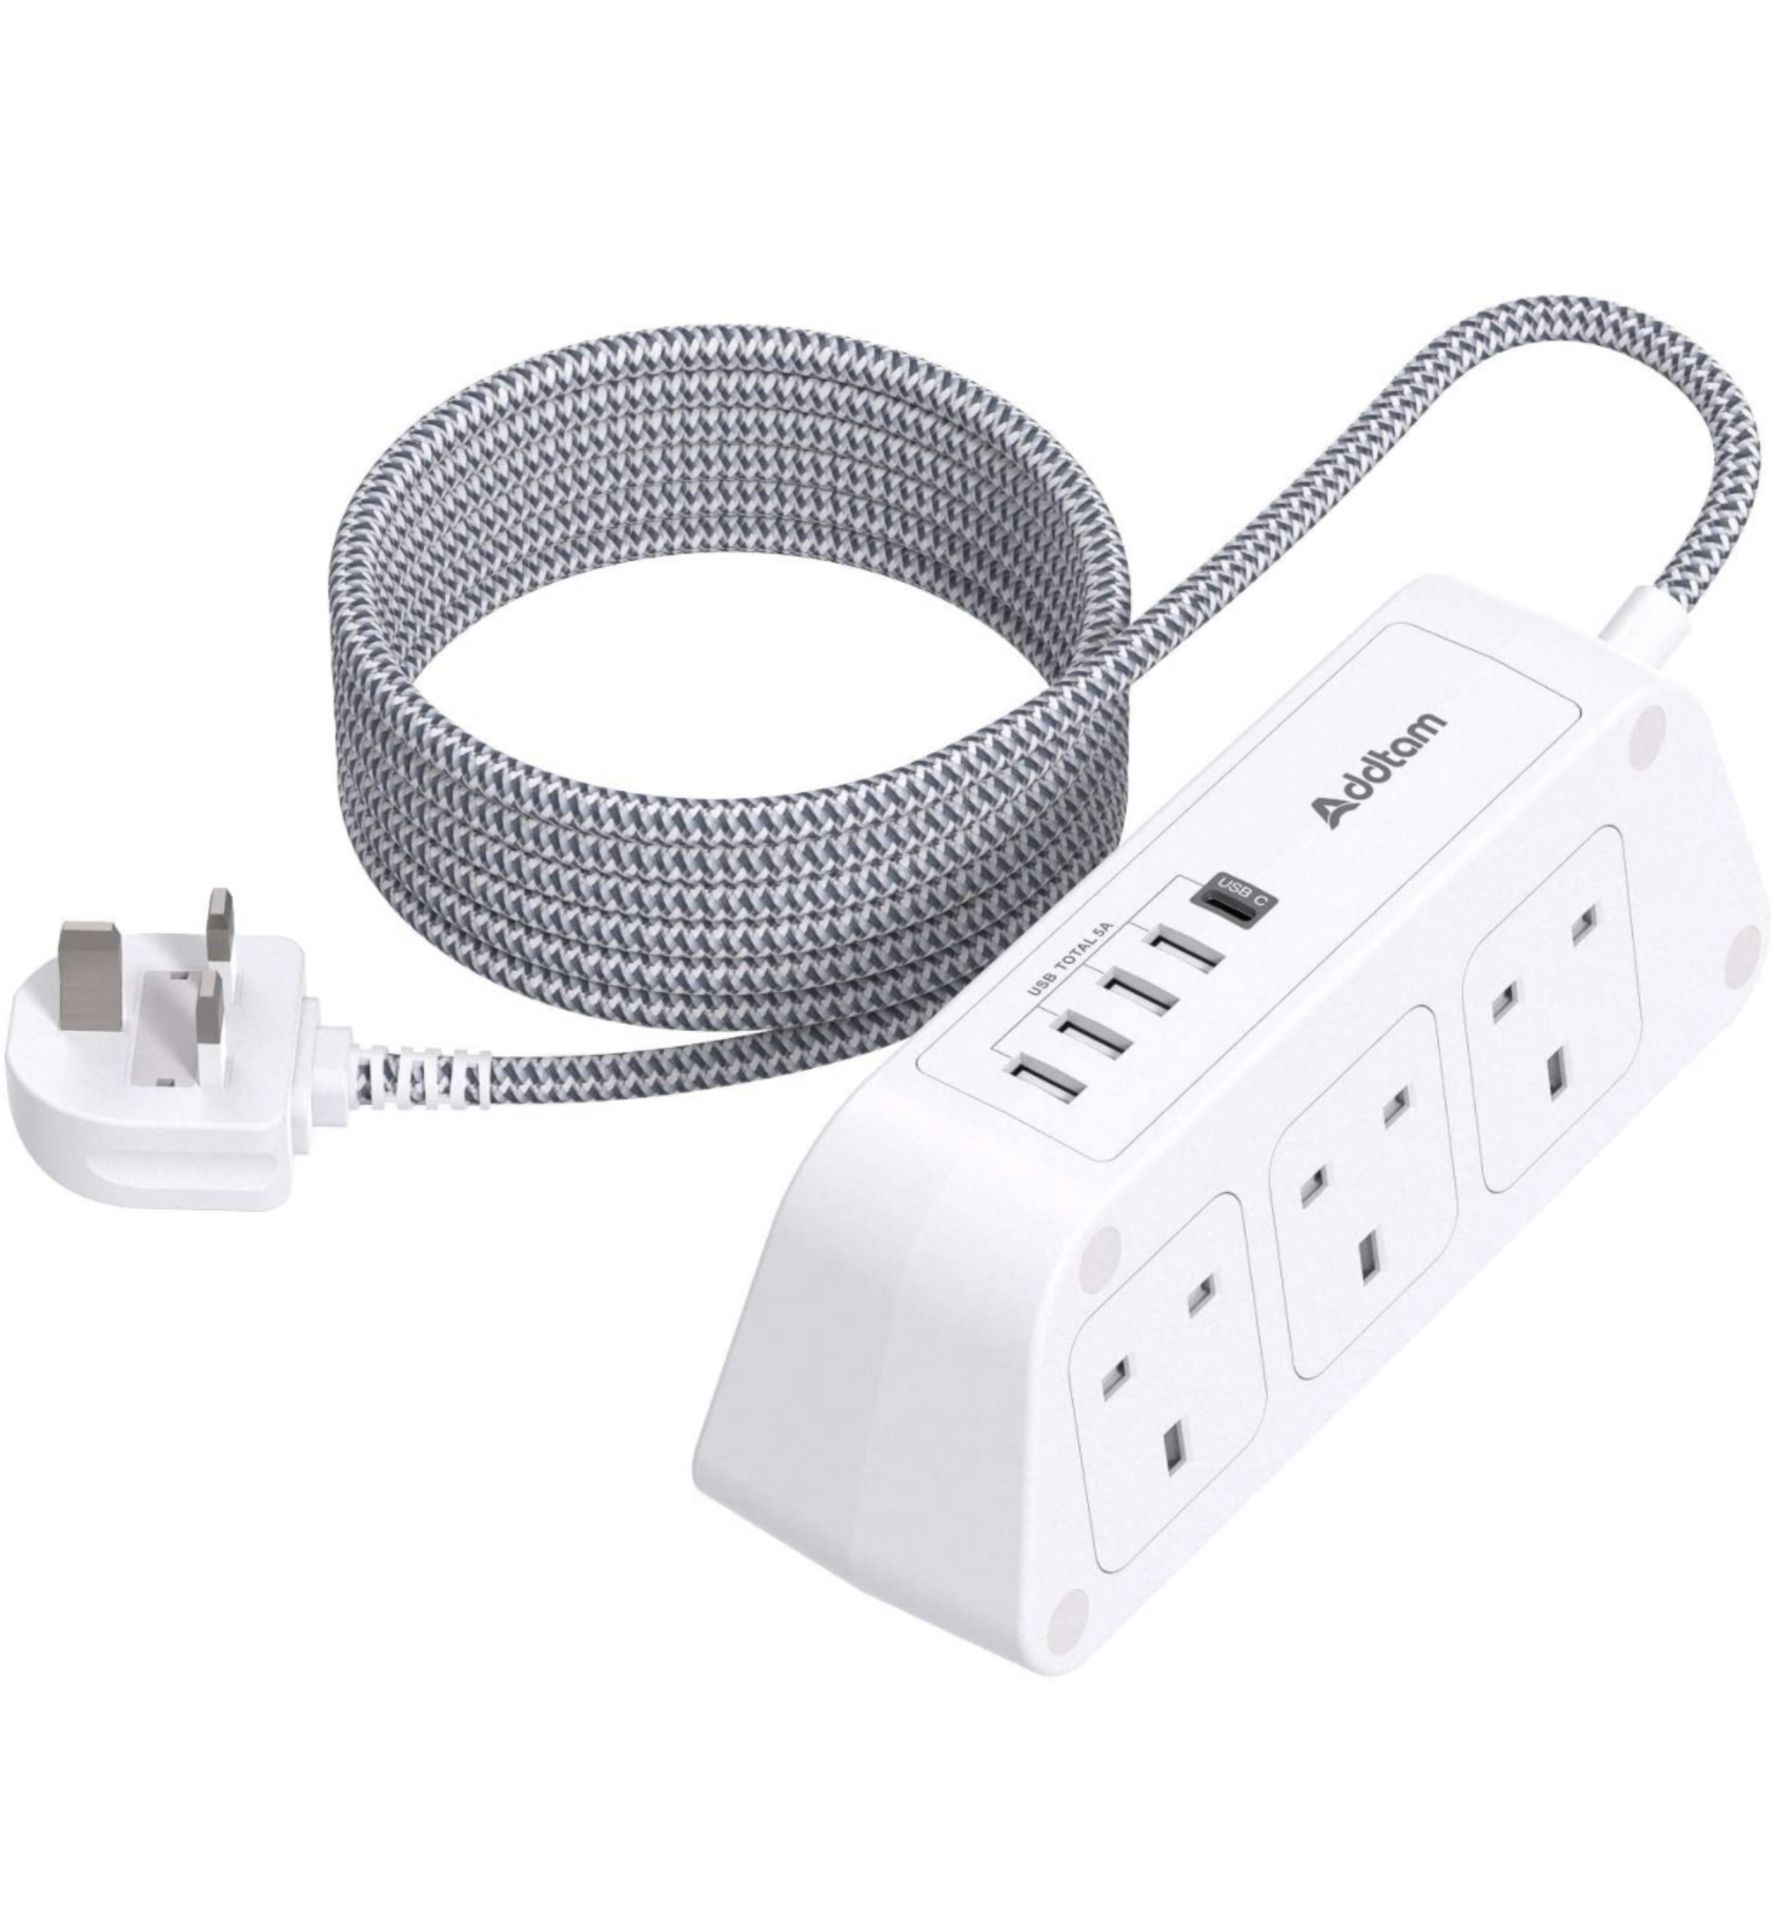 Addtam Extension Lead with USB Slots 6 Way Outlets 5 USB Ports